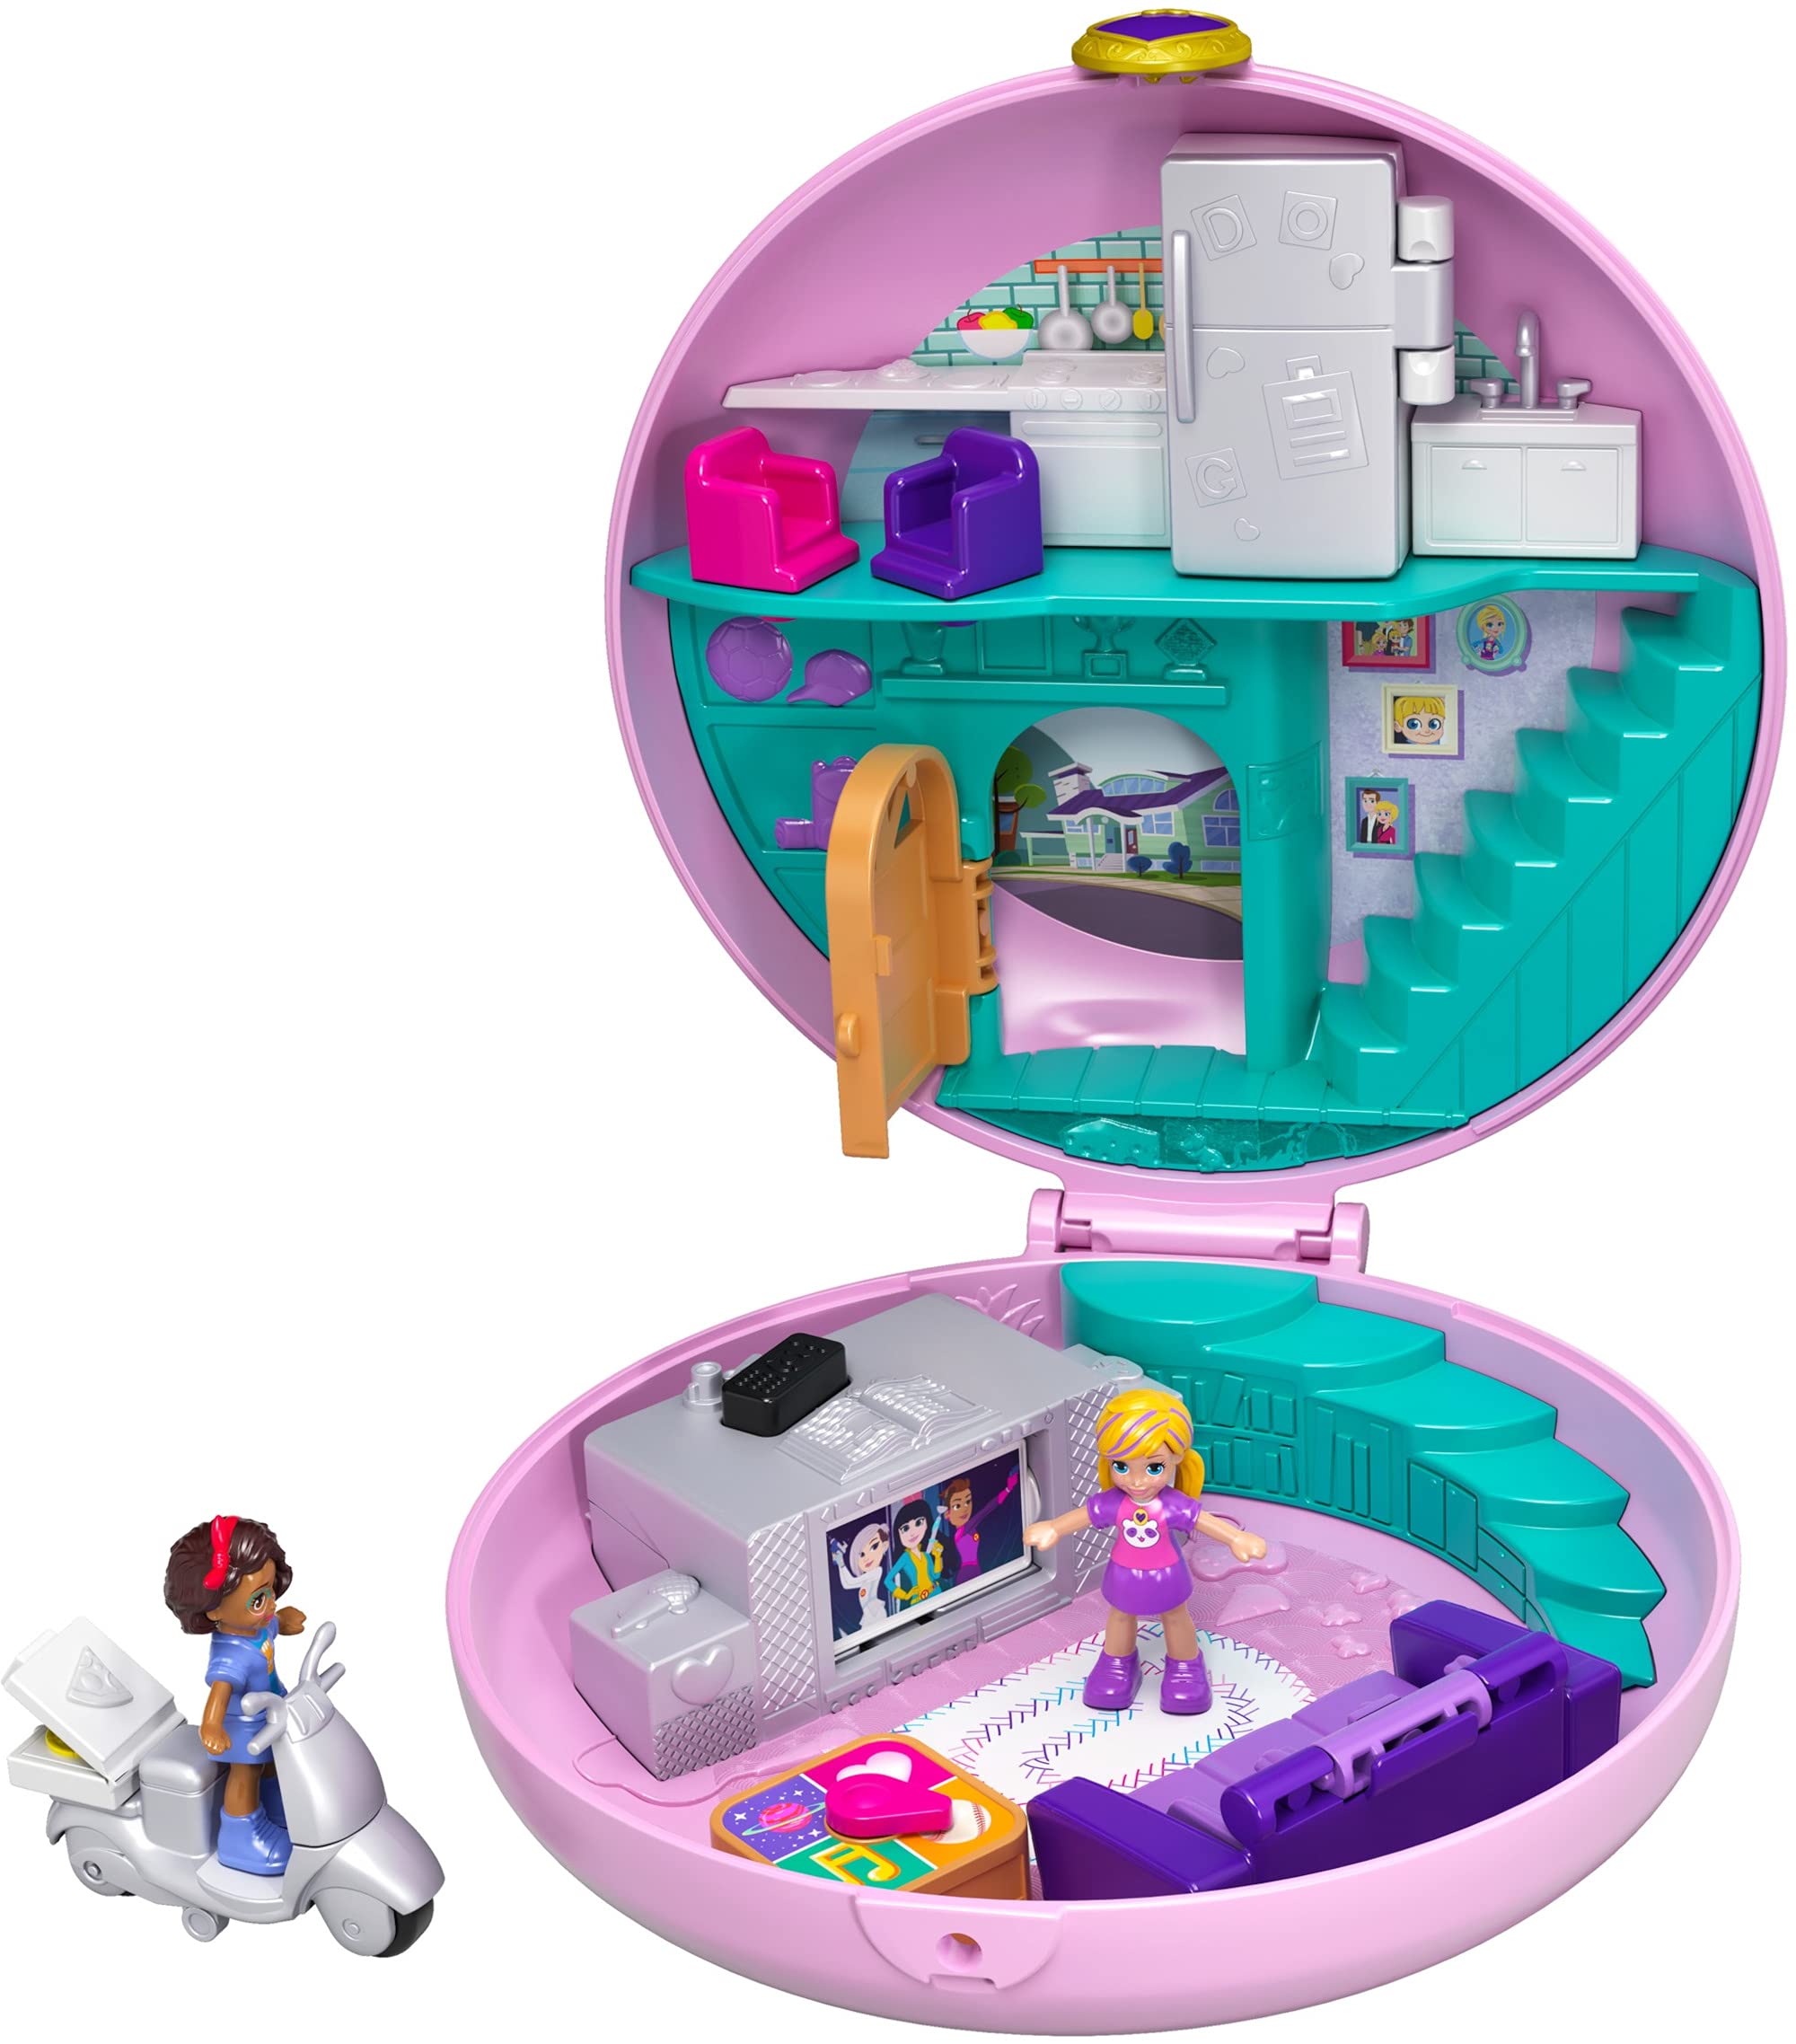 Polly Pocket Playset, Travel Toy with 2 Micro Dolls & Surprise Accessories, Pocket World Donut Pajama Party Compact, Food Toy